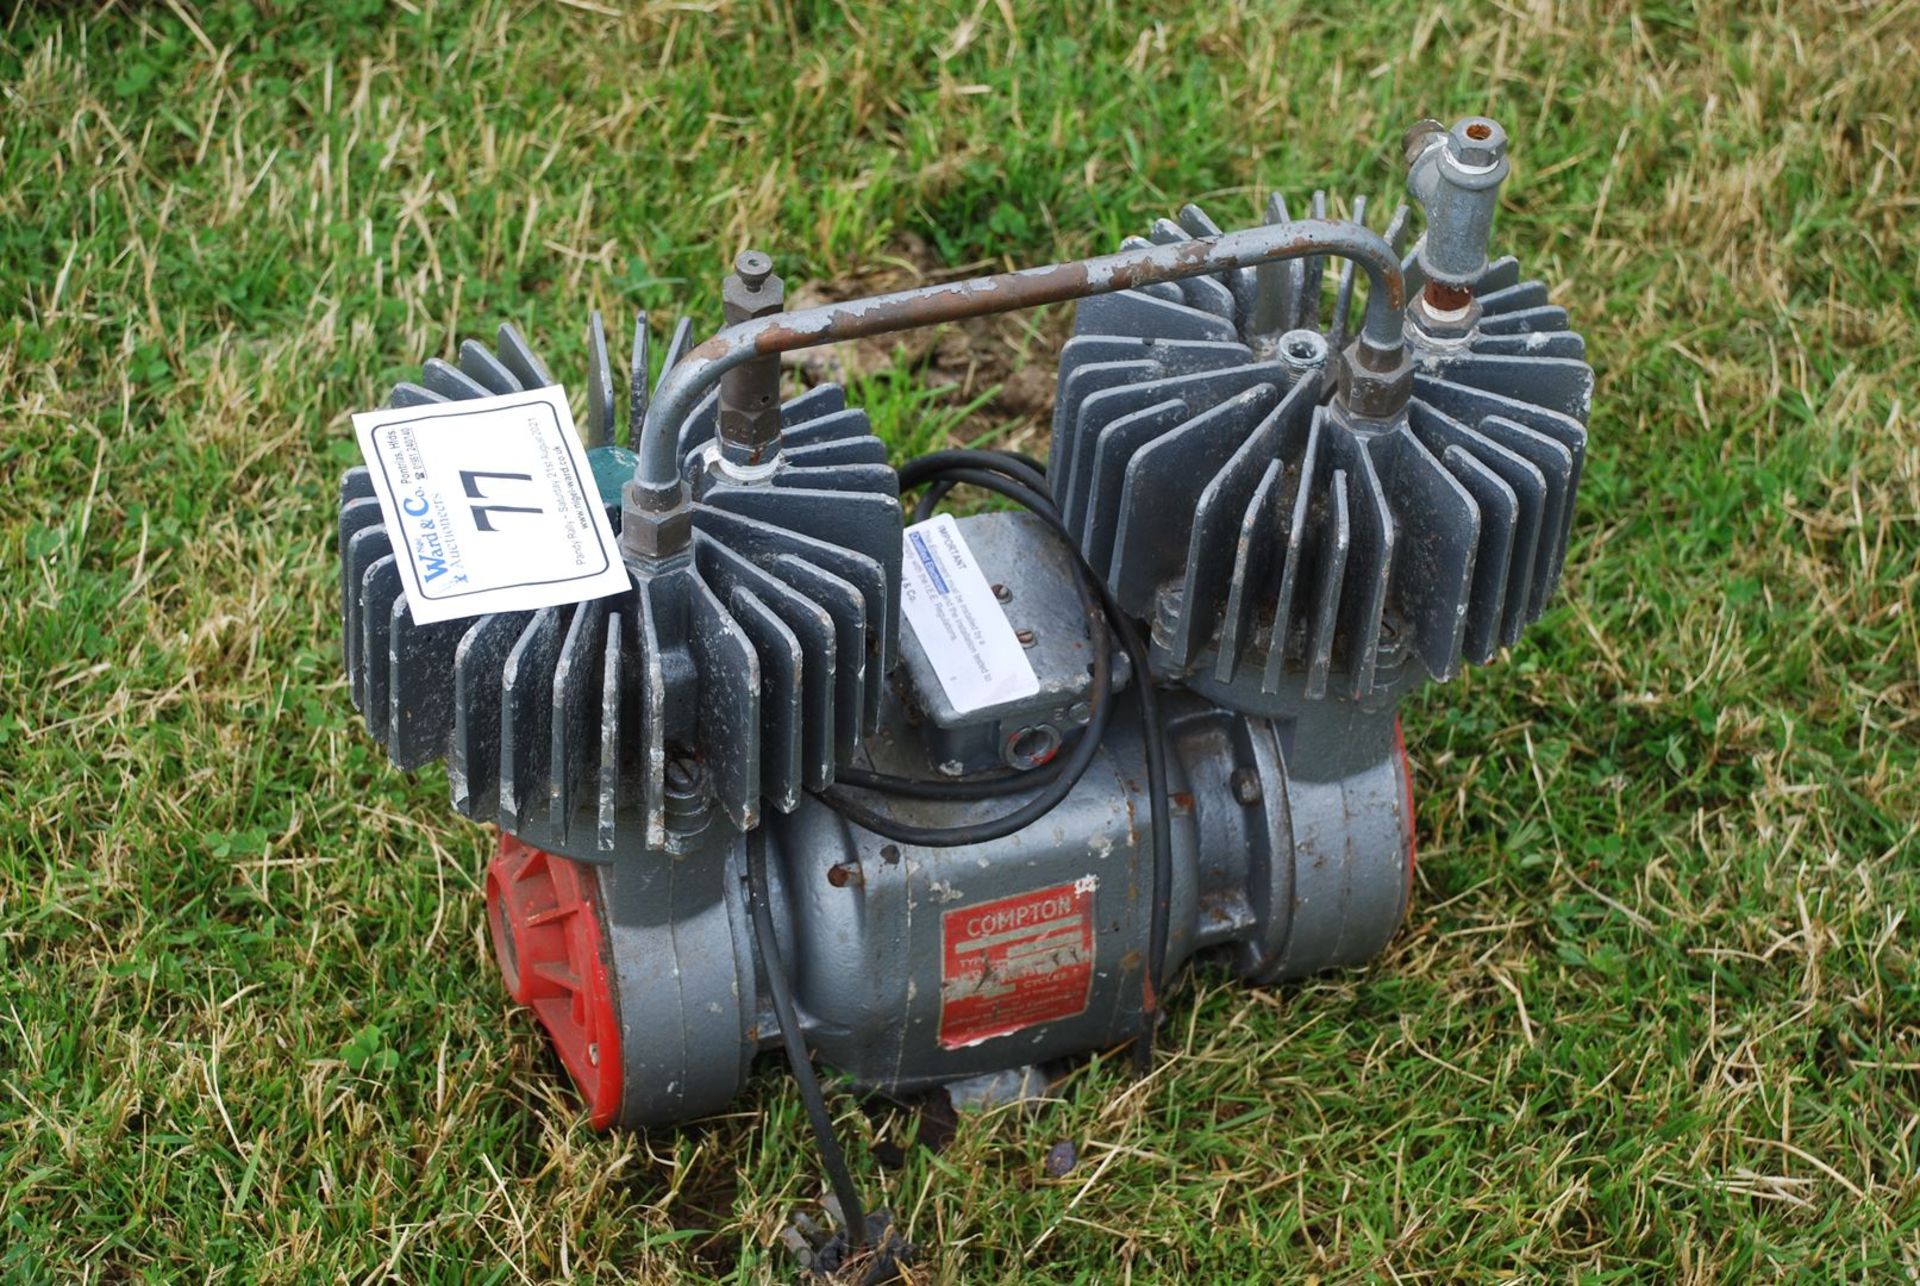 A Compton compressor, 240 v., twin-cylinder, (not run or tested).